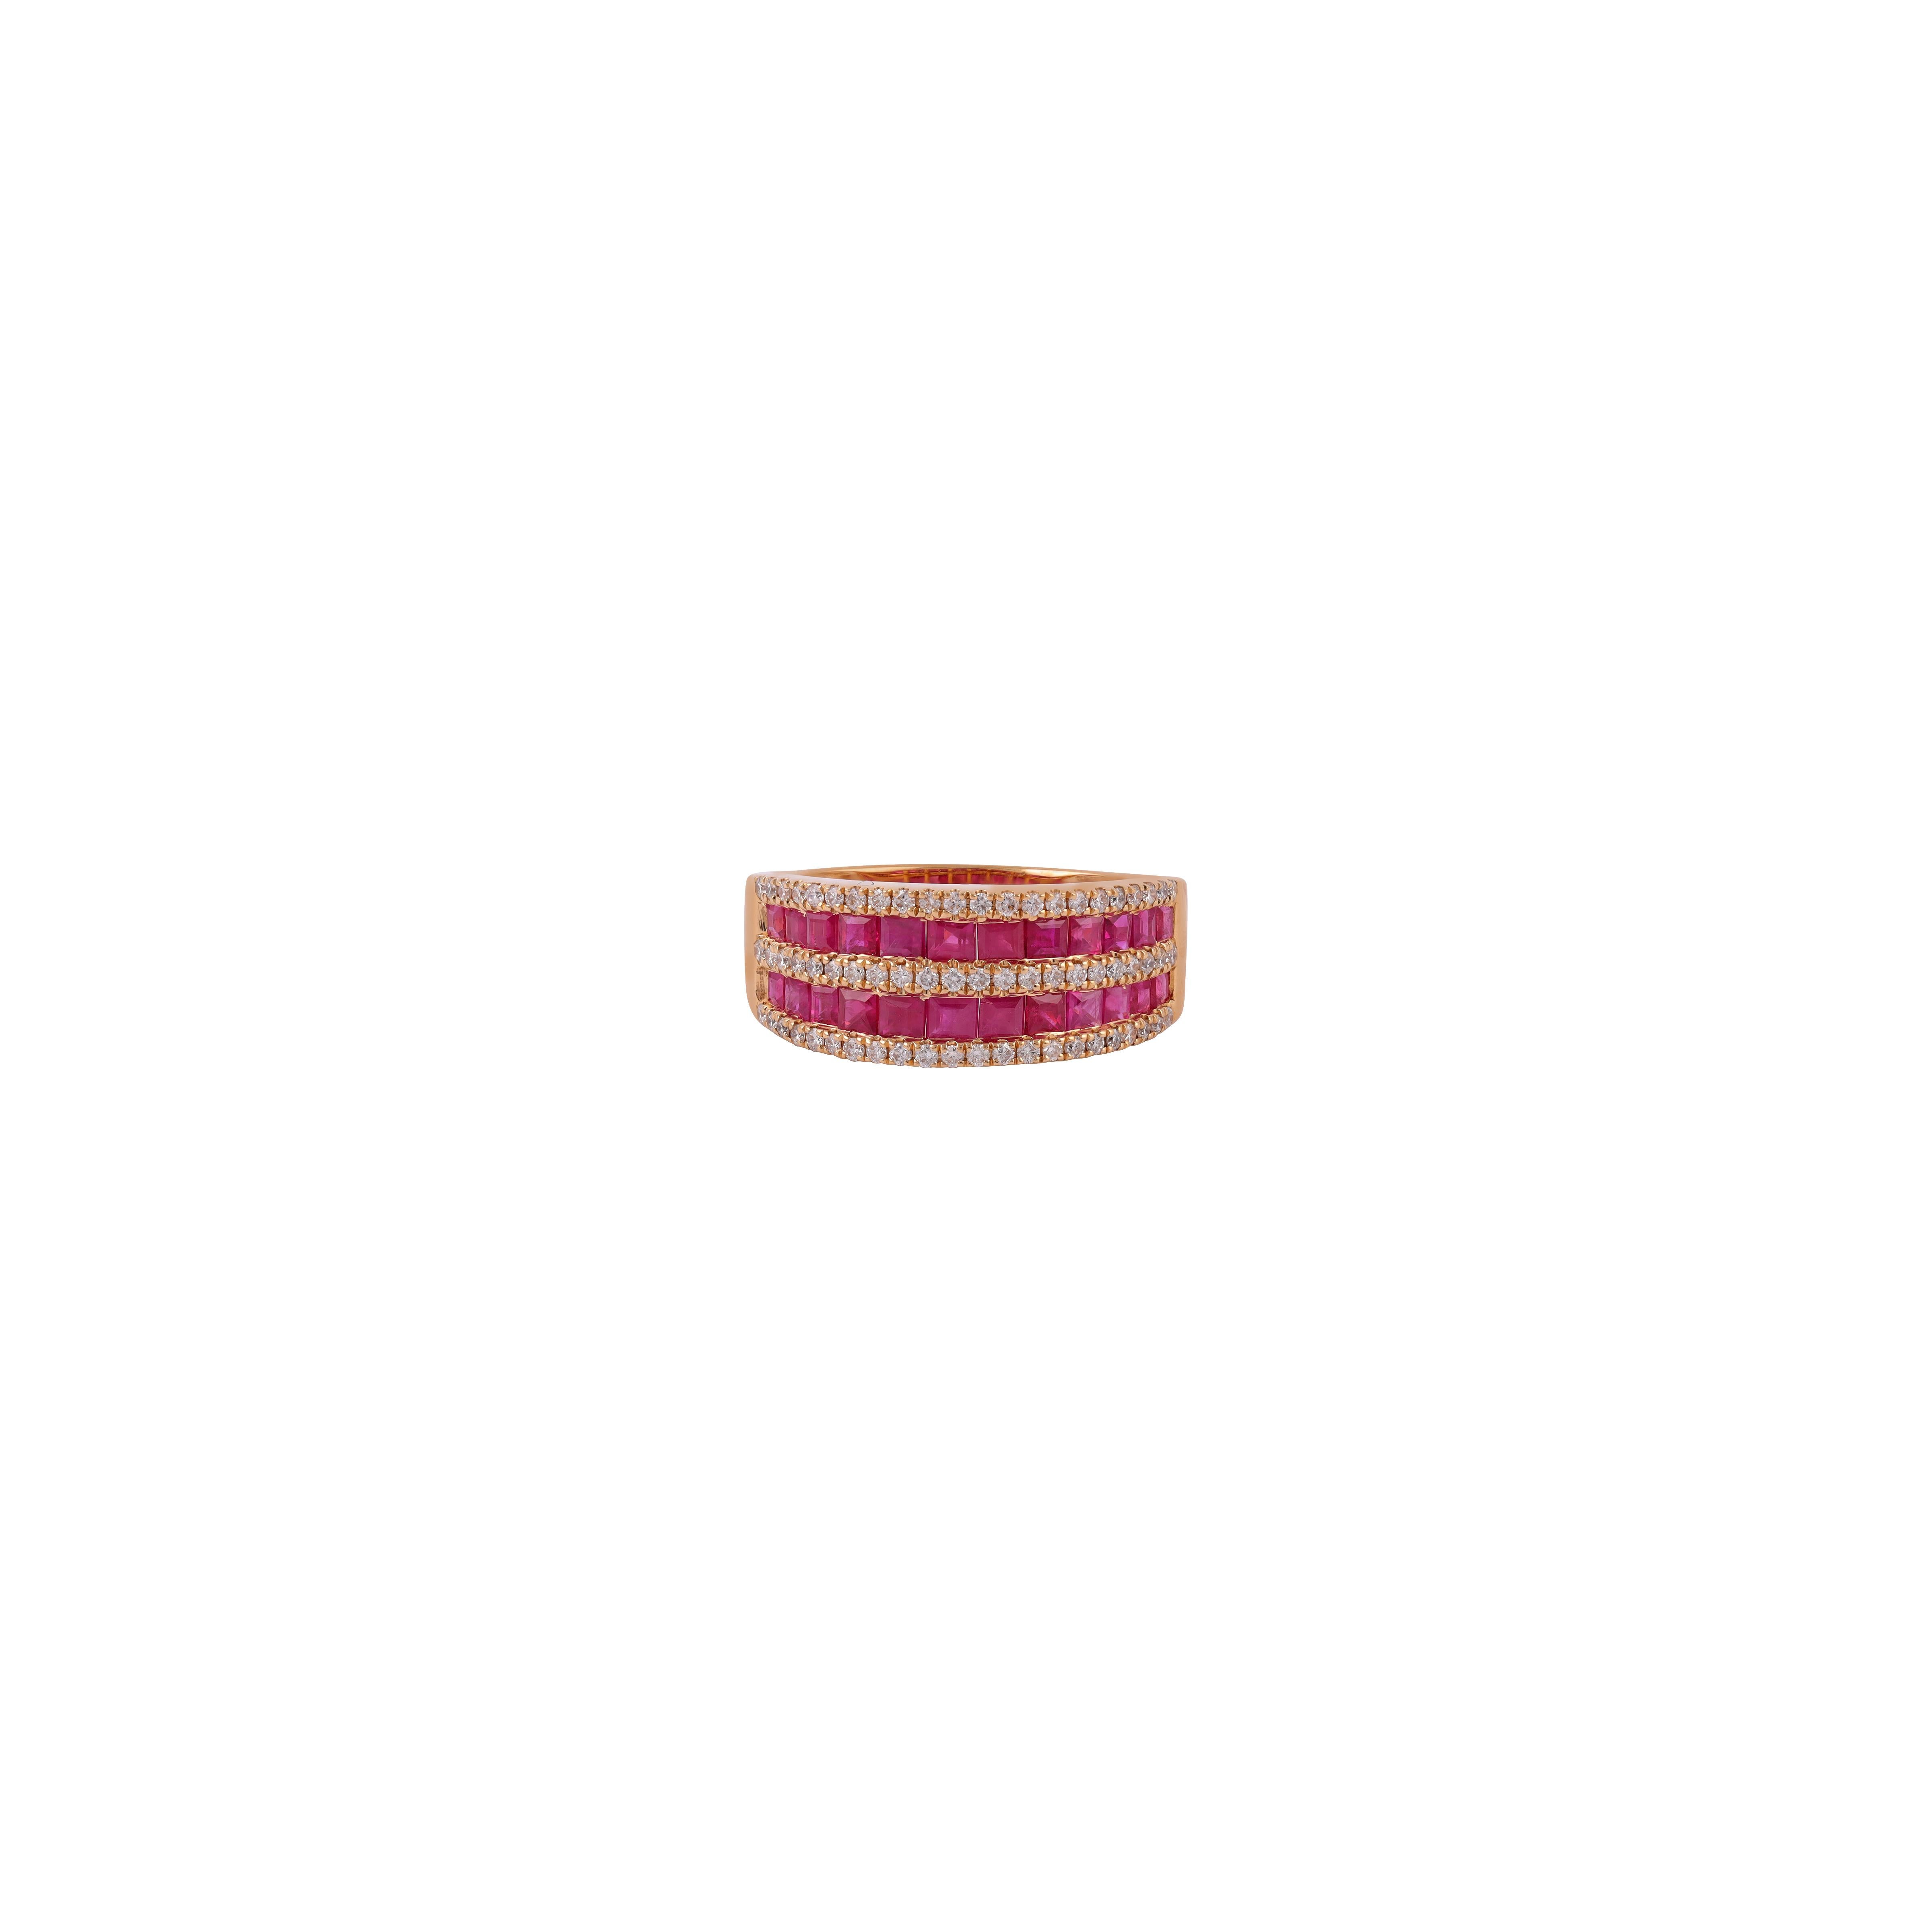 Its an elegant ring studded in 18k  gold with  Mozambique natural ruby weight 1.74 carat & Diamond 0.35 Carat , this entire ring studded in 18k gold weight 5.21 grams.
Ring Size : 6.5


 ring size can be change as per the requirement.
